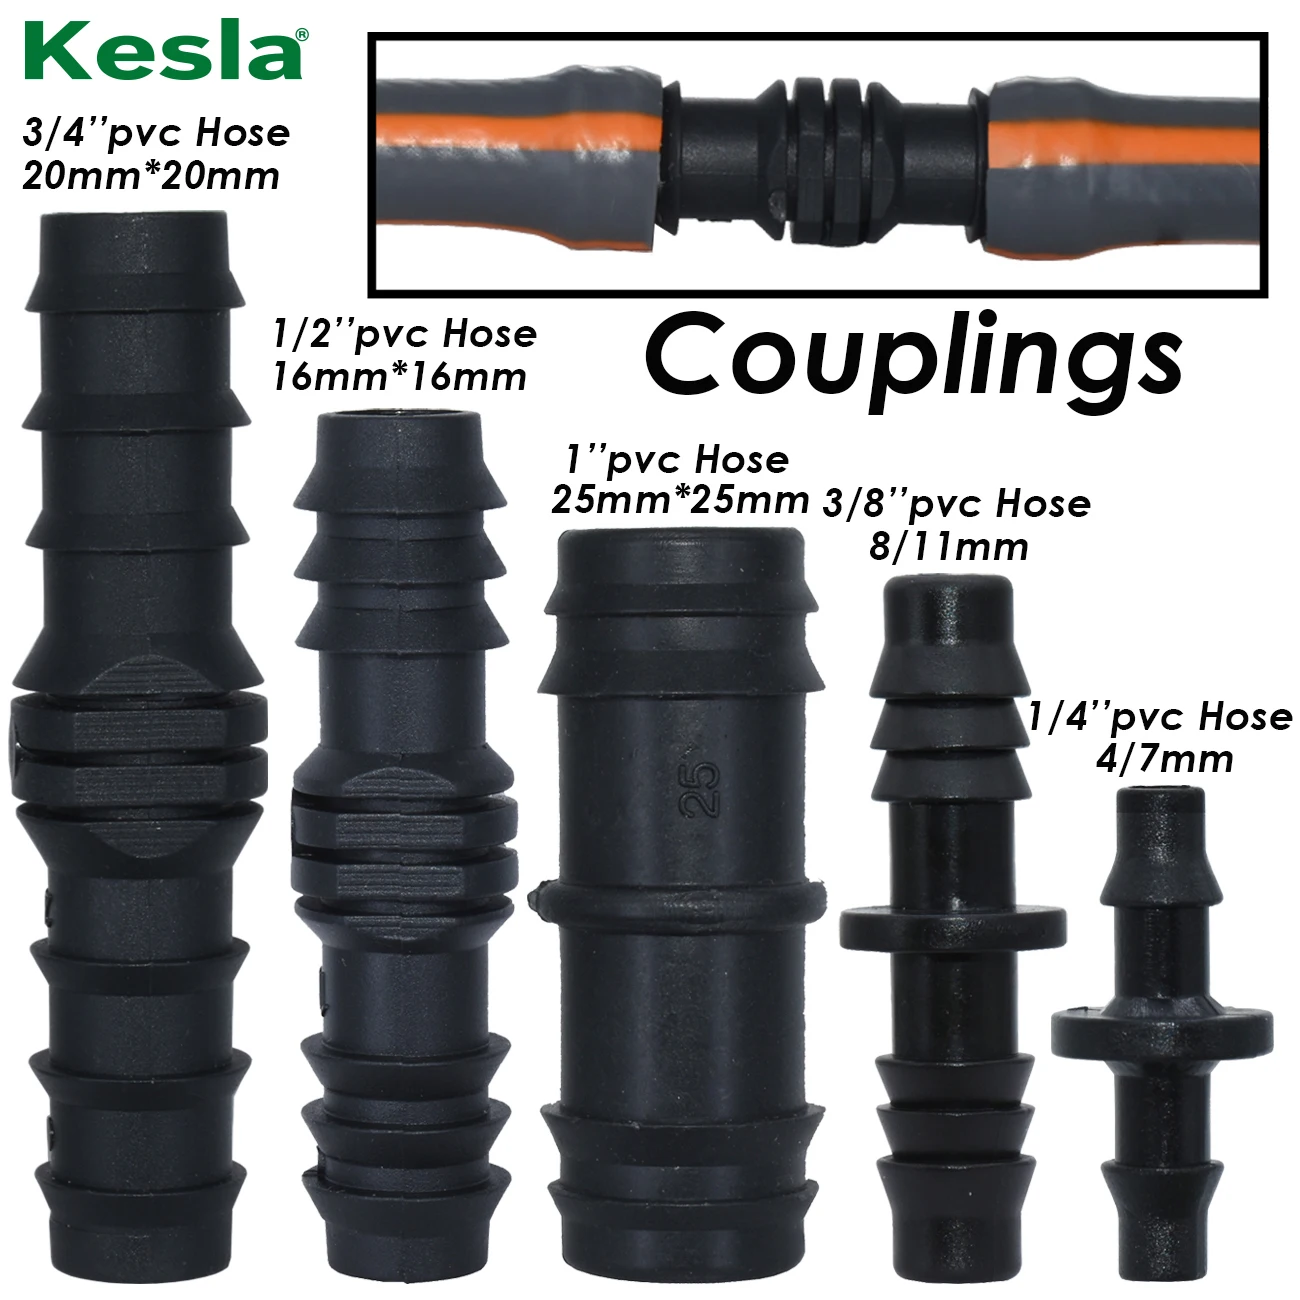 KESLA 1/4'' 3/8'' 3/4'' 1'' Garden Water Barbed Coupling Connecter DN16 DN20 DN25 Straight Adapter Micro Drip Irrigation Fitting